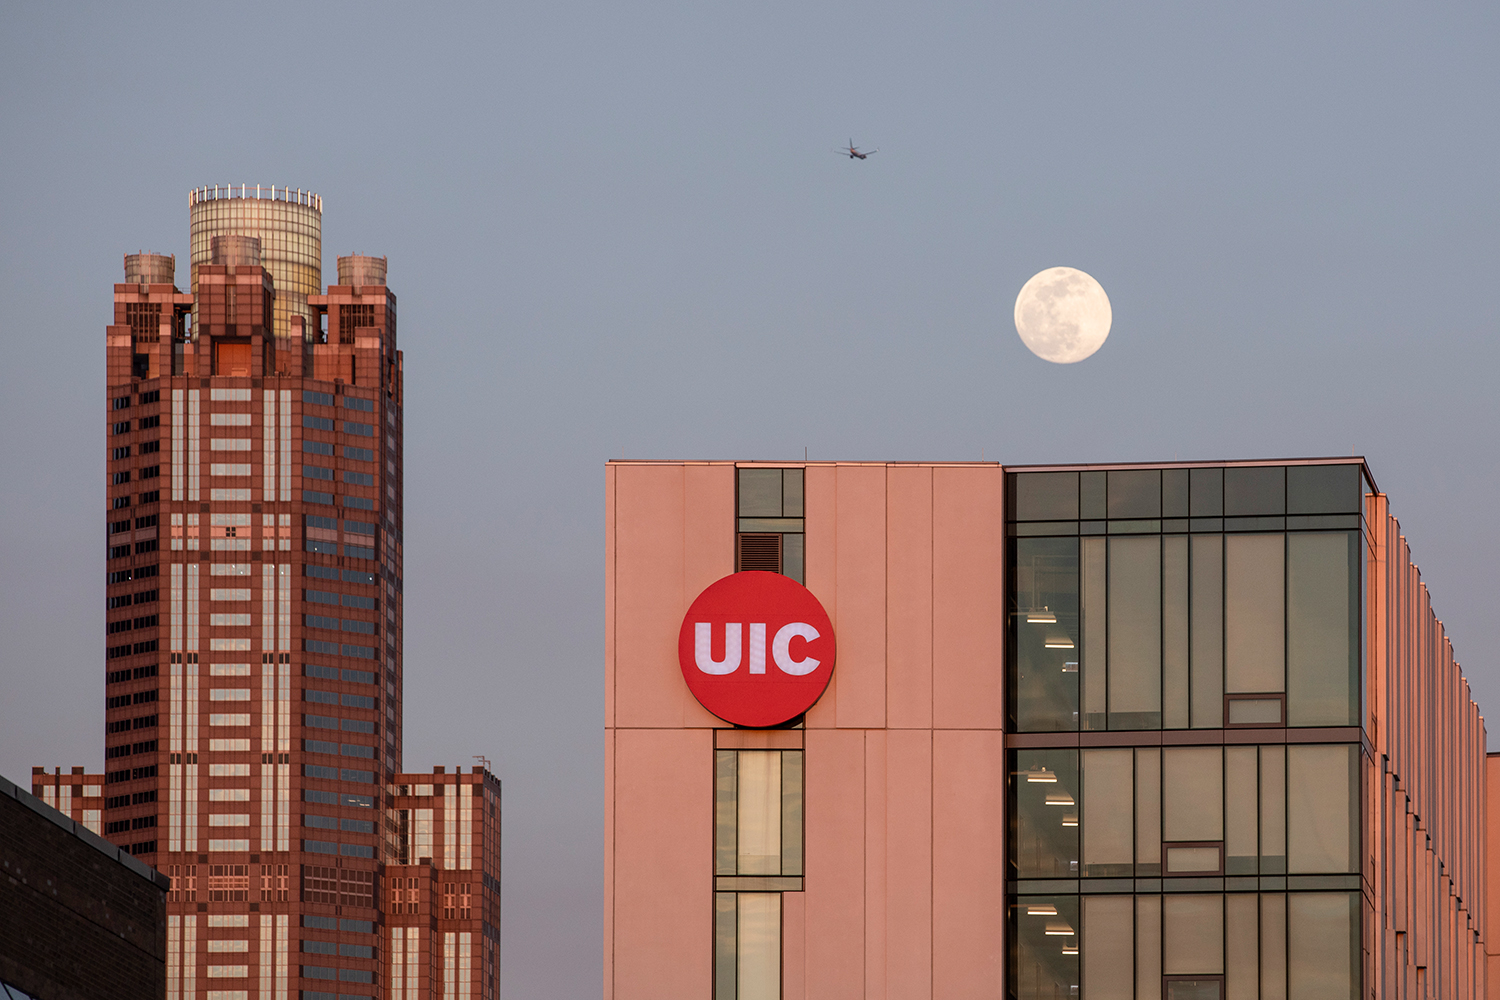 A full moon rises over ARC on Sunday evening.